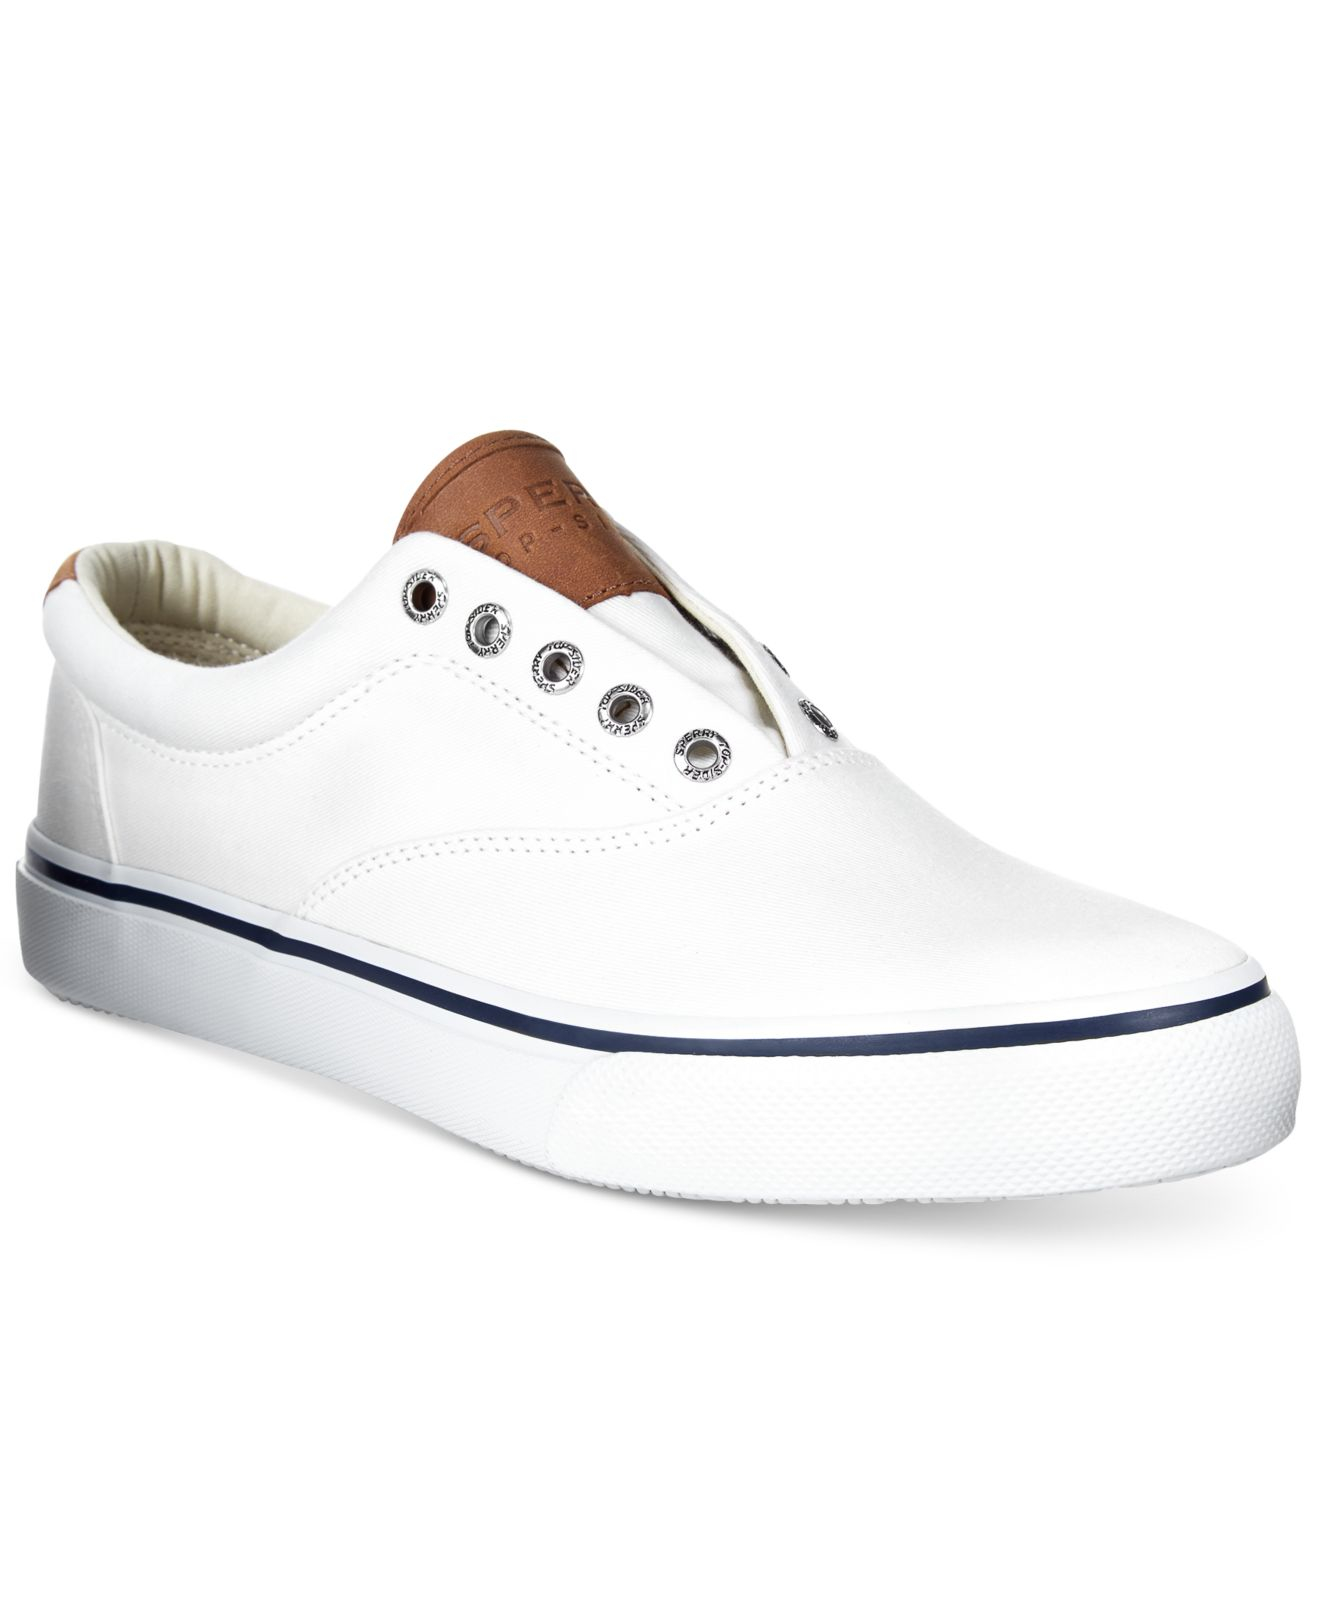 Sperry Top-Sider Cotton Men's Laceless Cvo Sneakers in White for Men - Lyst